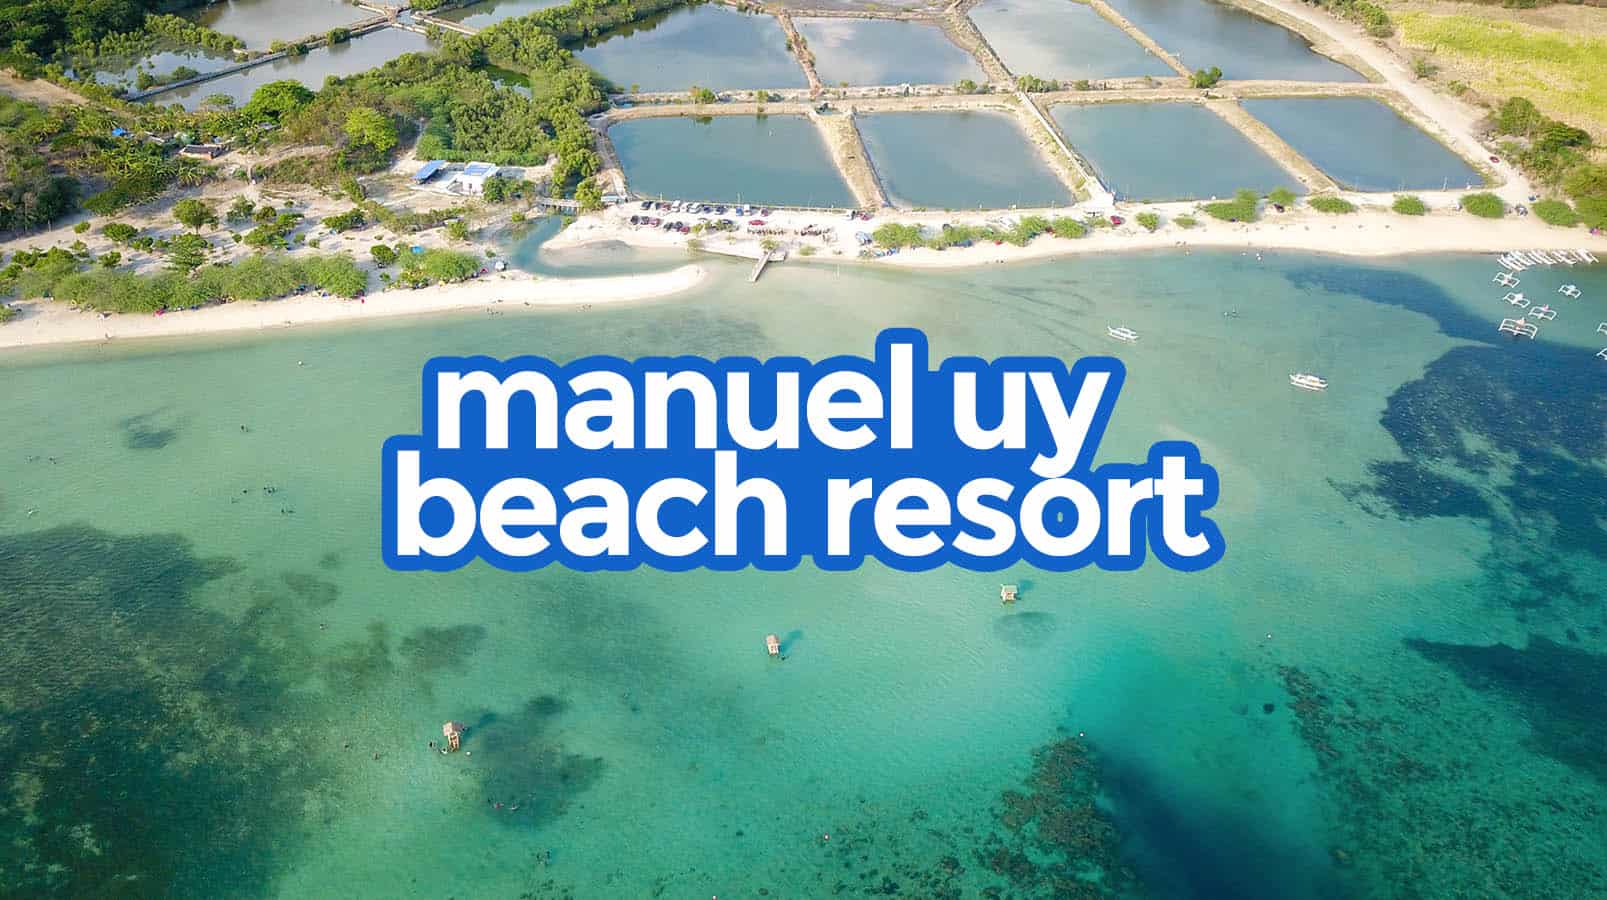 Manuel Uy Beach Resort, Batangas | Travel Guide | Rates | How to Get There | Itinerary